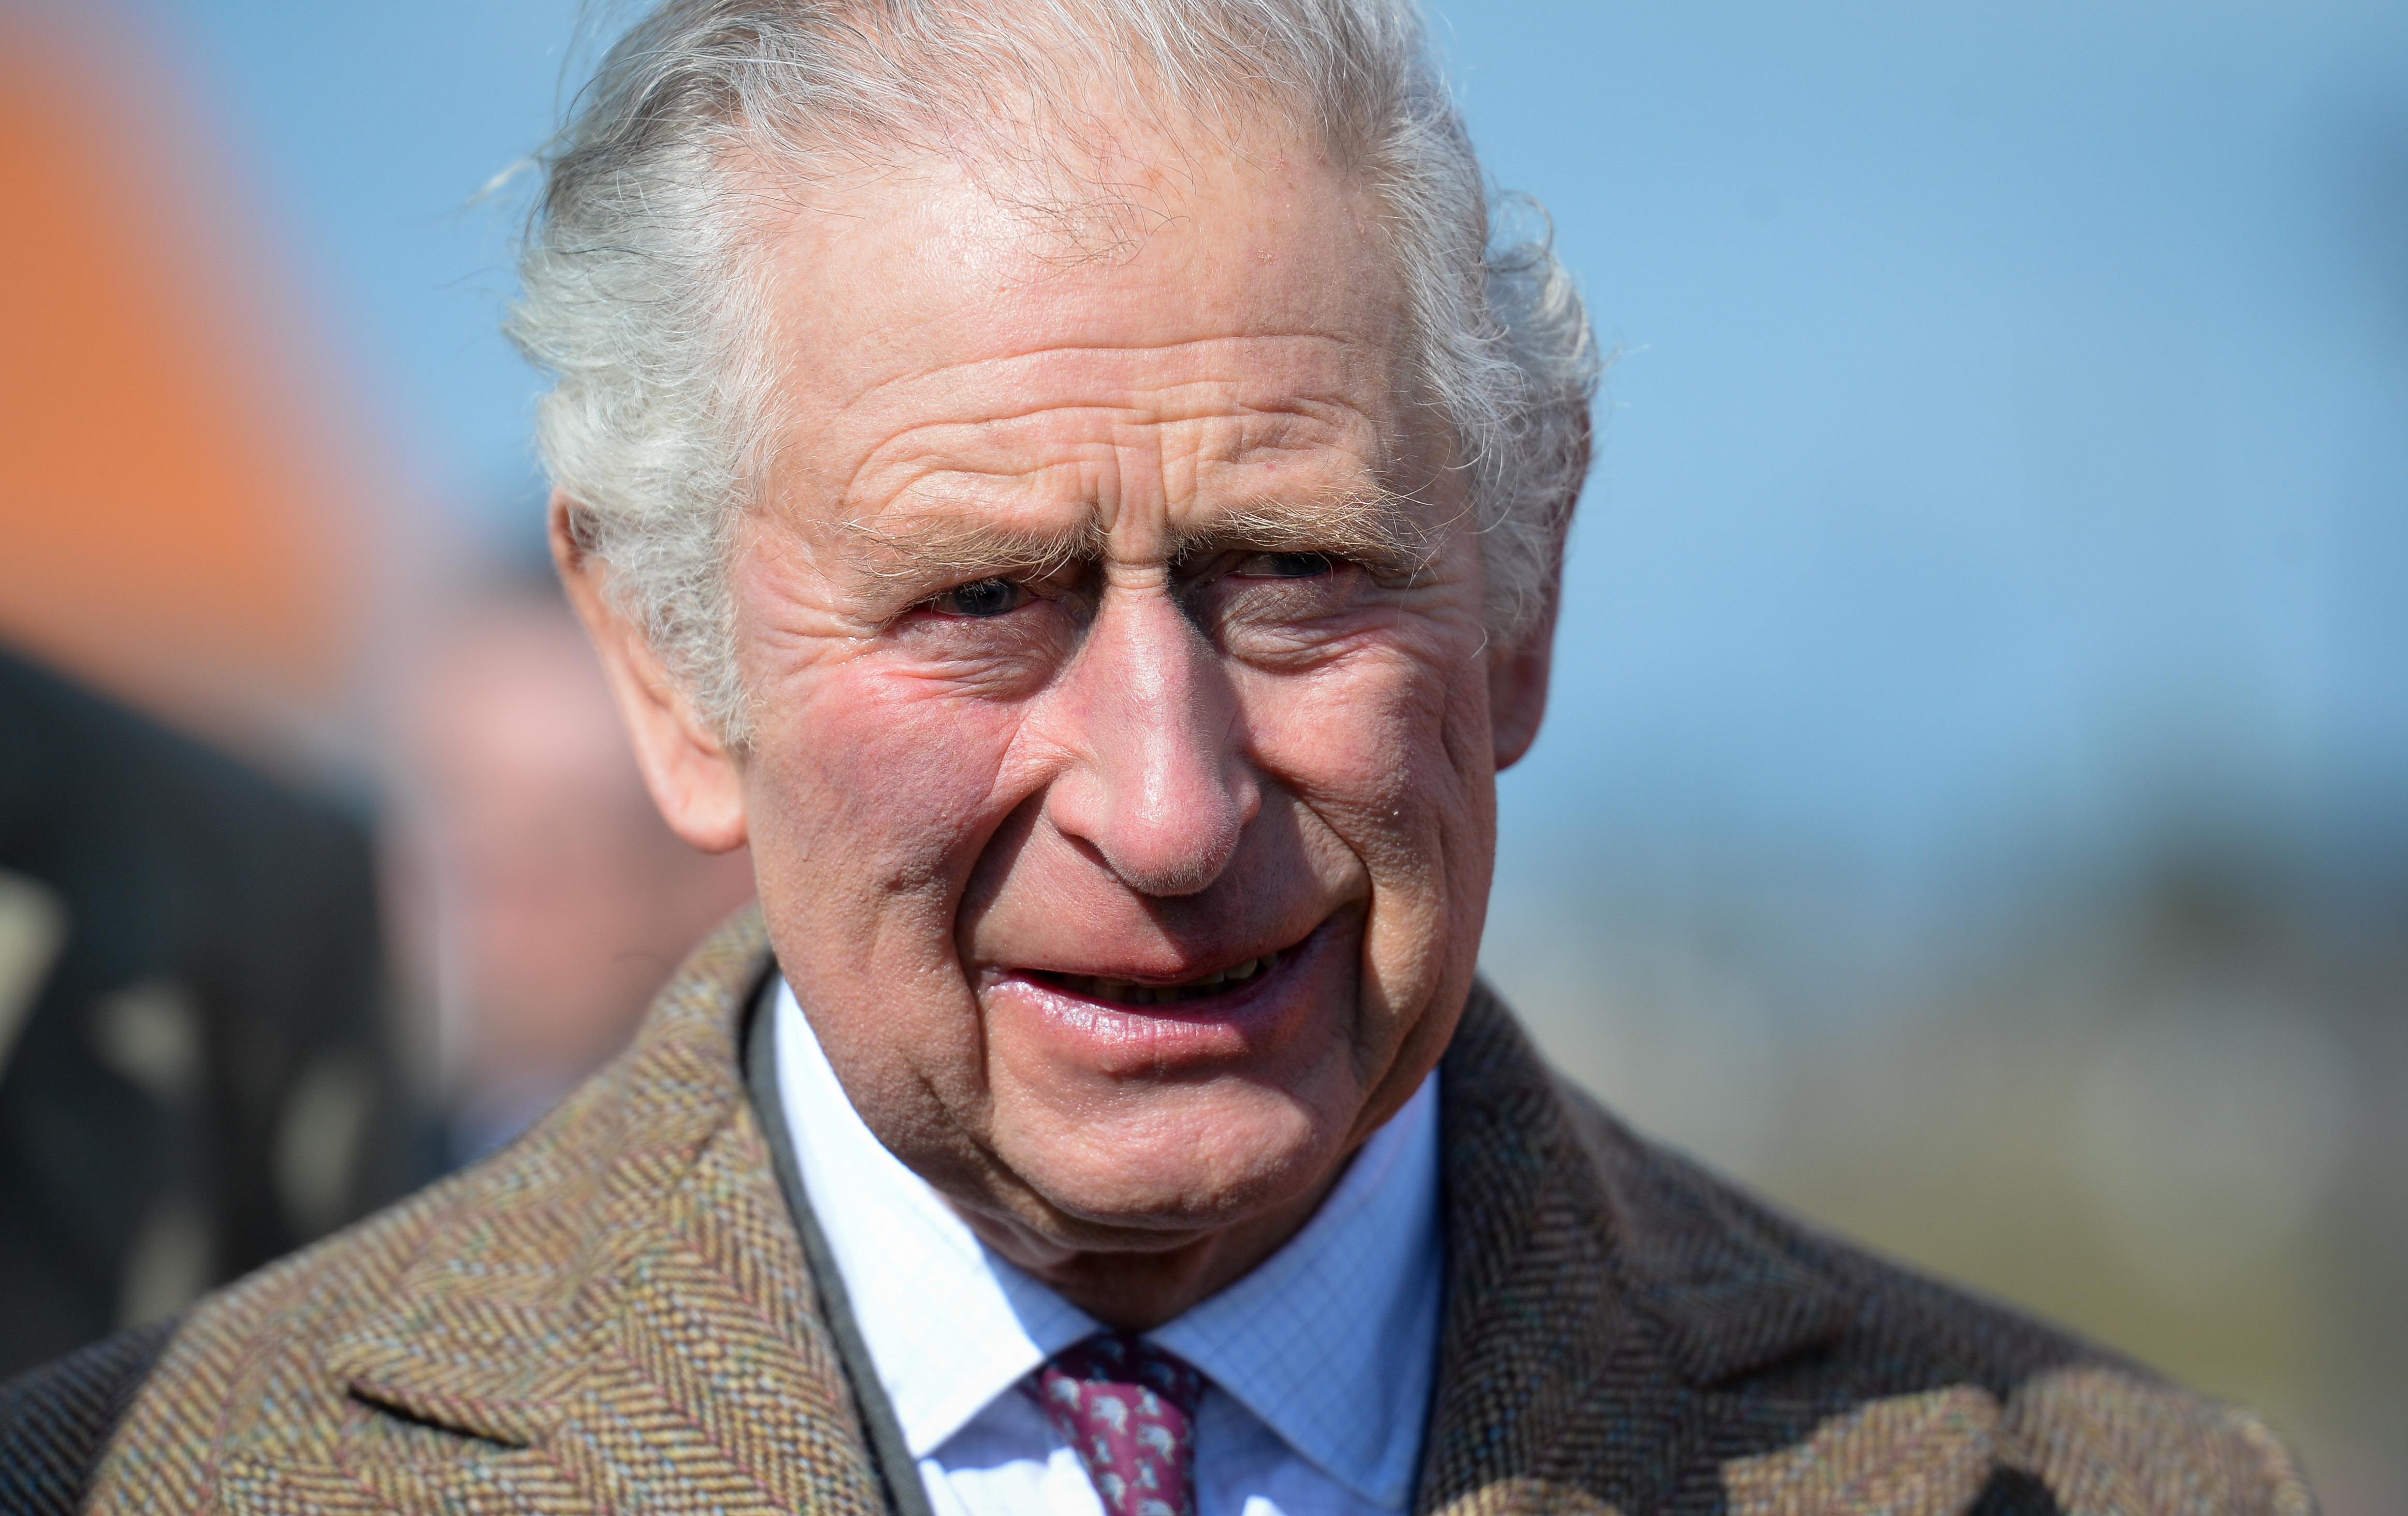 King Charles III during his visit to the Royal British Legion Centenary Wood on March 7, 2022 in Newquay, England | Source: Getty Images